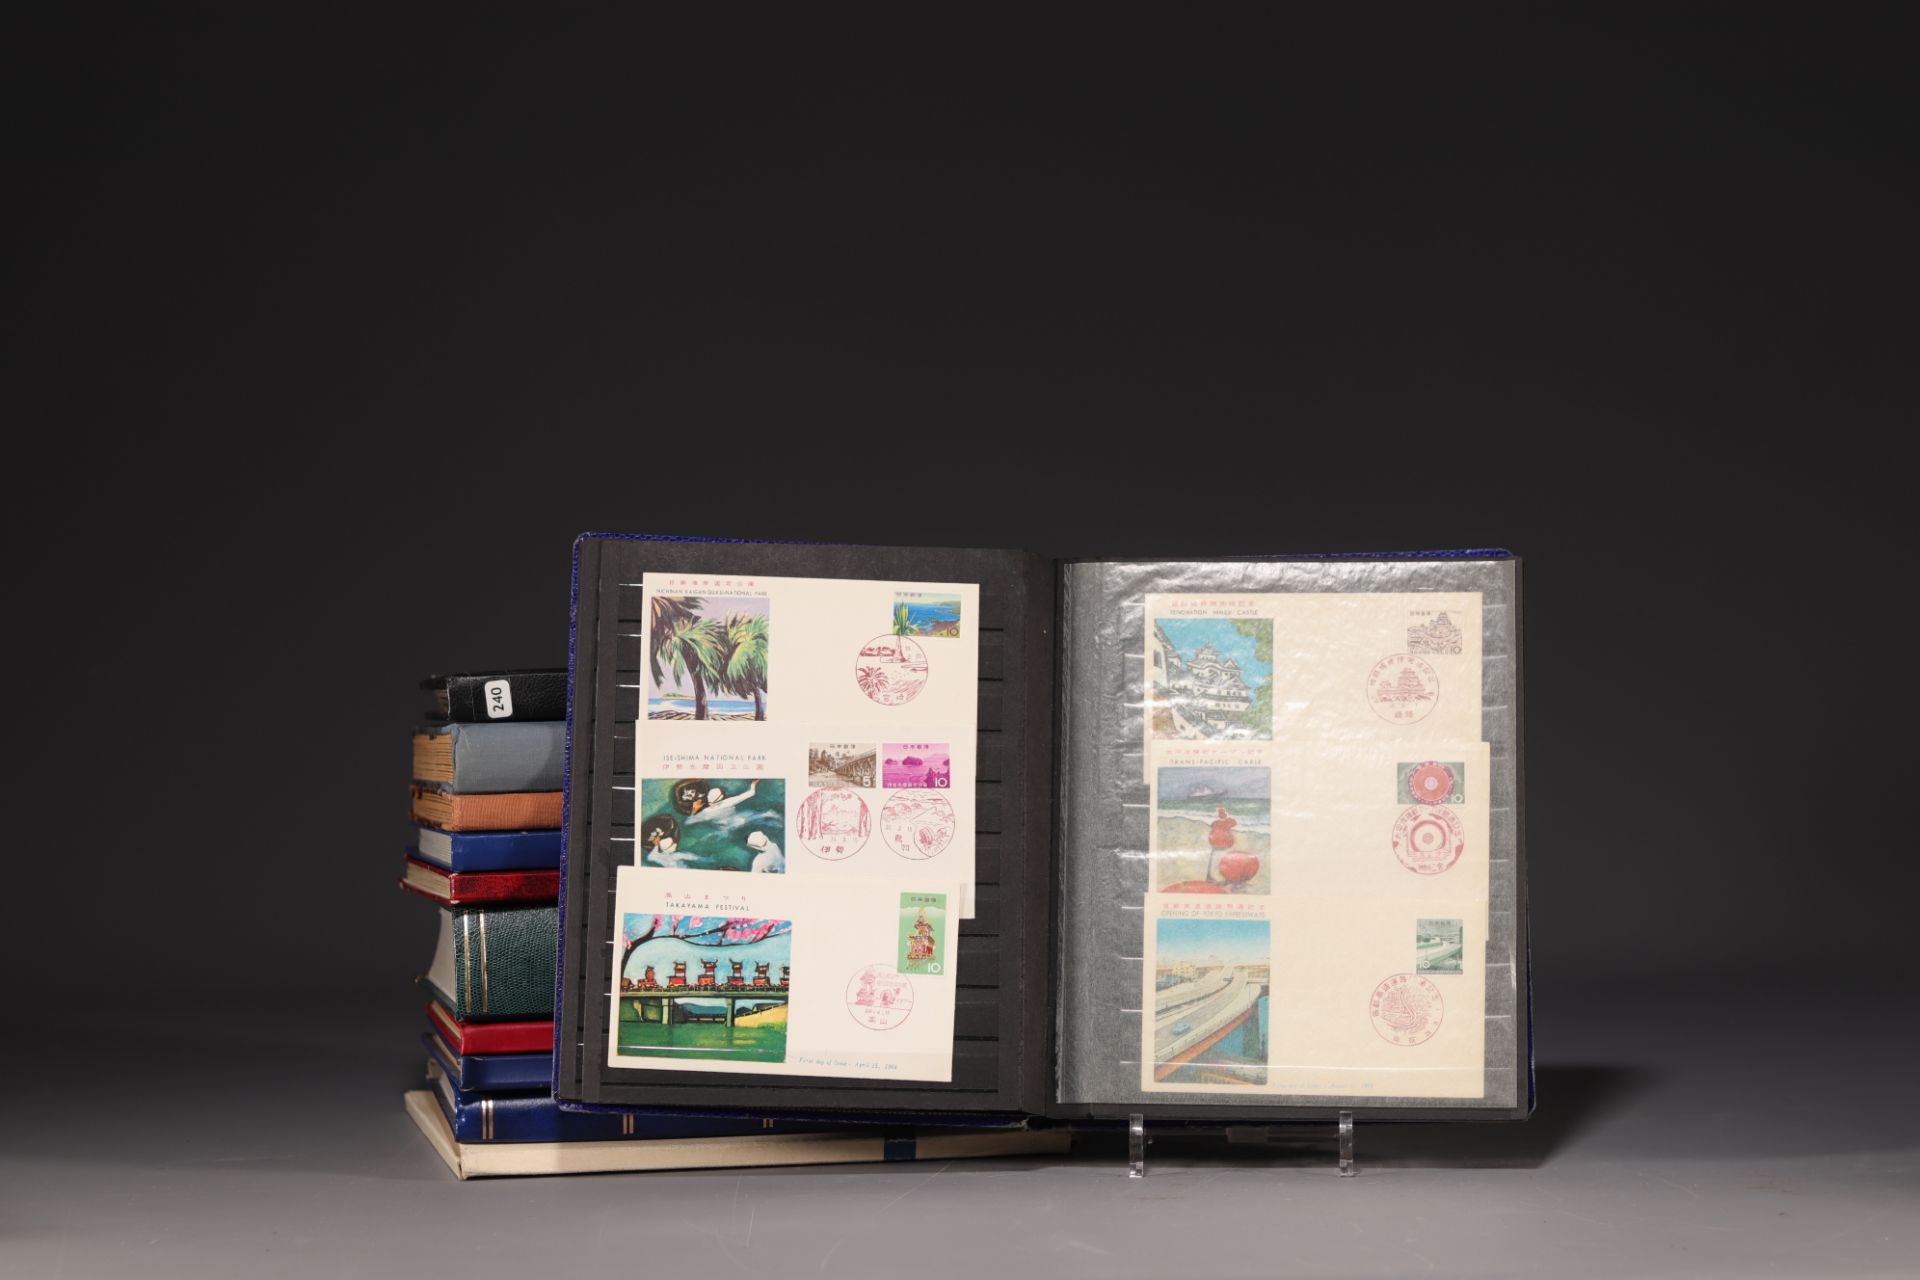 Set of 21 albums of world stamps, China, Japan, Middle East, Europe, etc. (Batch 1) - Image 5 of 14